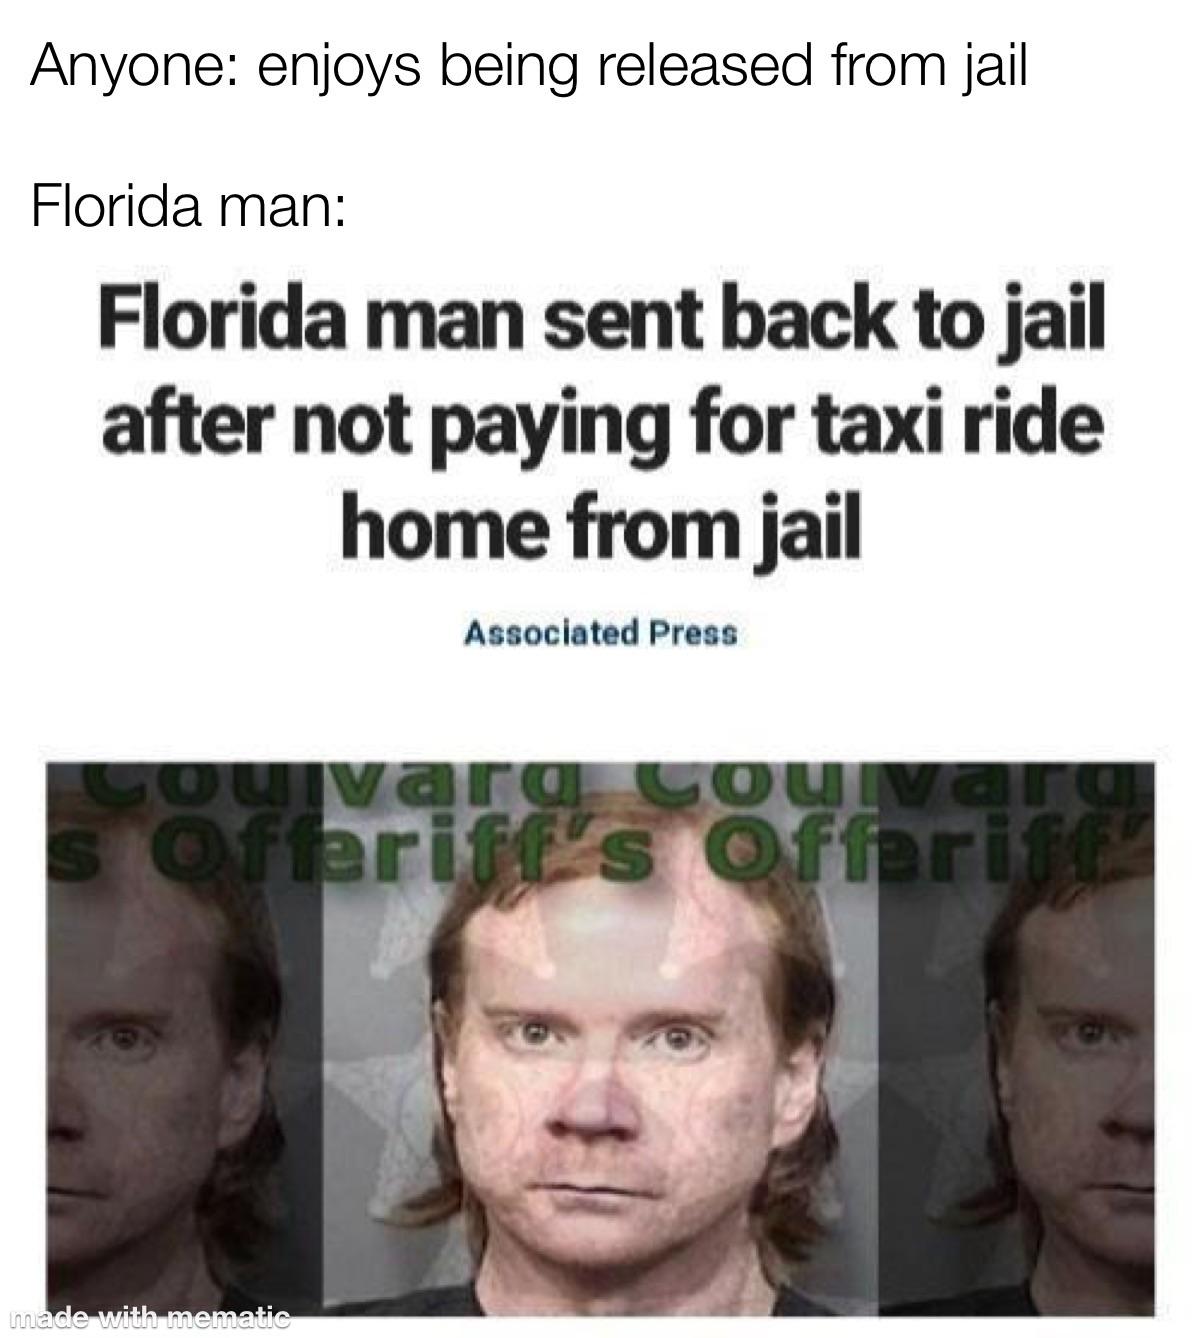 facial expression - Anyone enjoys being released from jail Florida man Florida man sent back to jail after not paying for taxi ride home from jail Associated Press Ouivara Louiv Ofteriff's Offeriff made with mematic